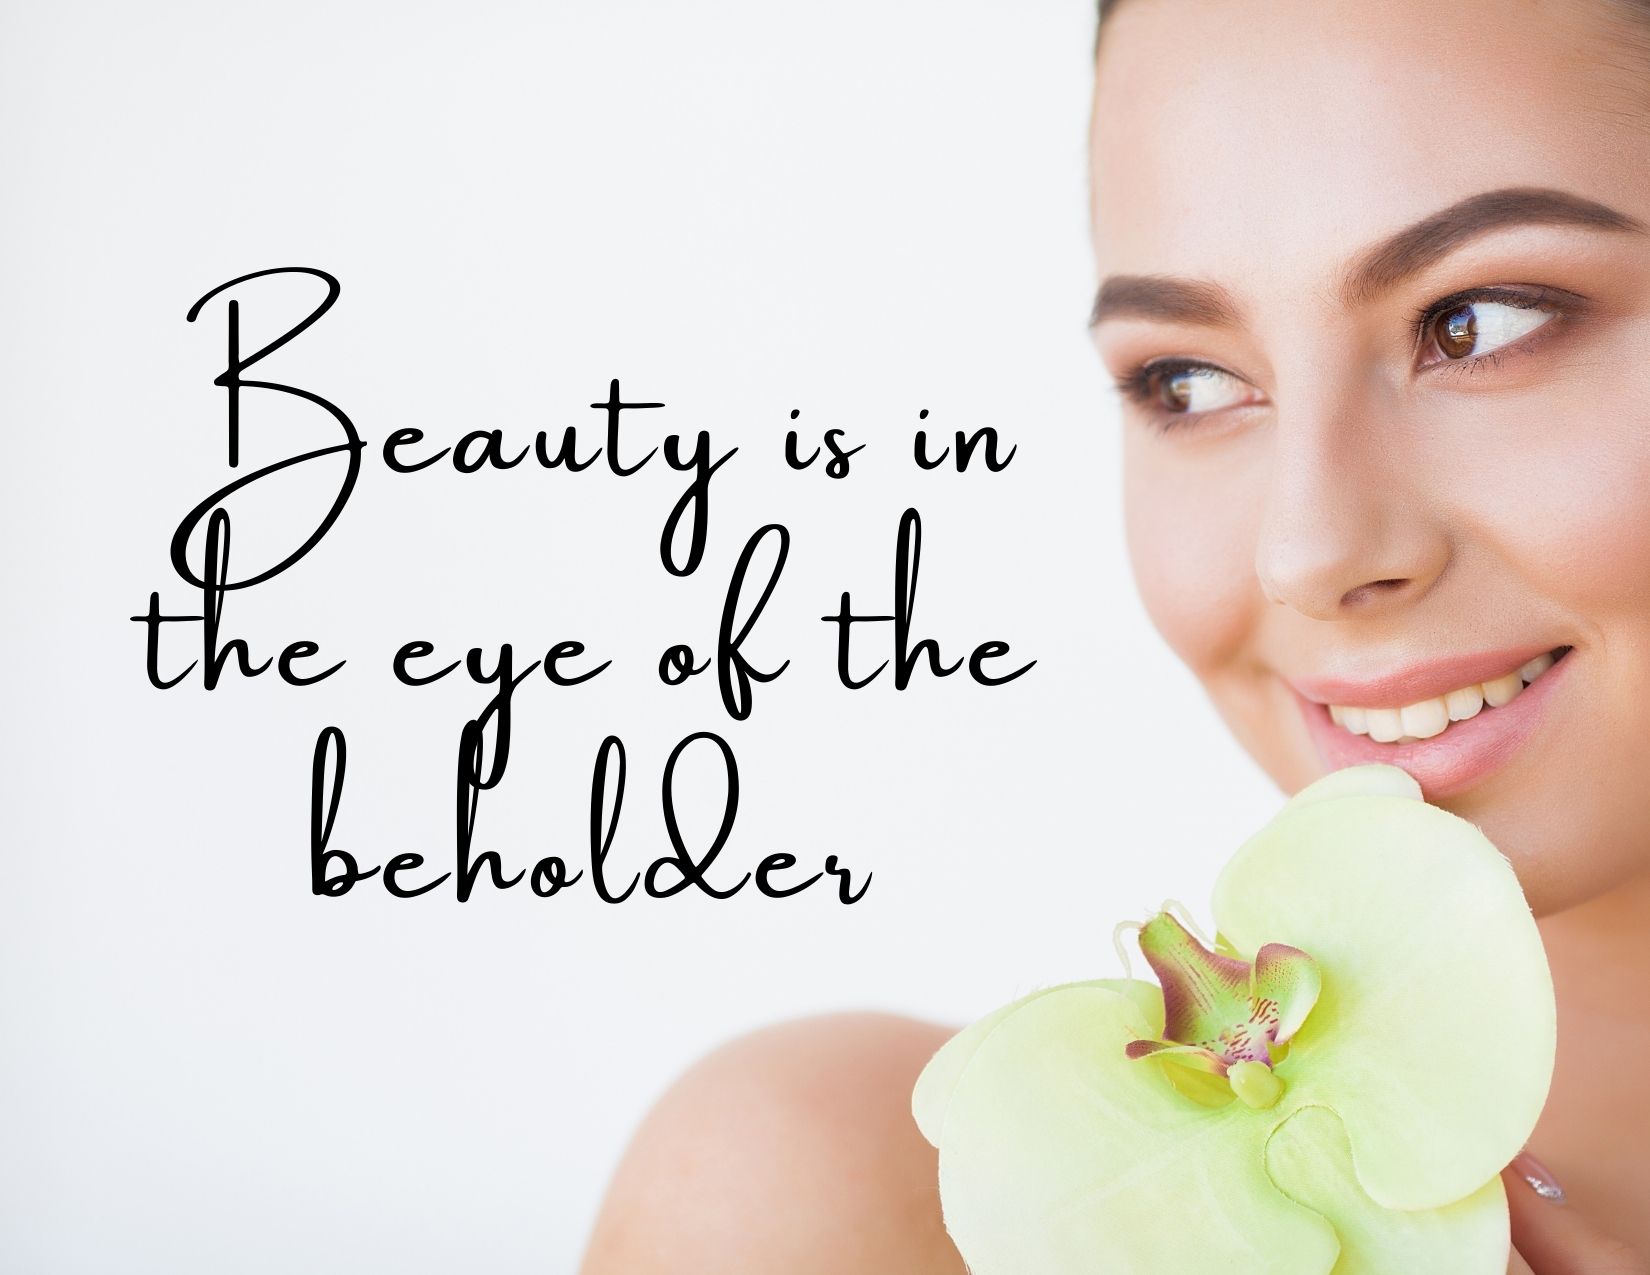 A graphic of a beautiful woman with the phrase "beauty is in the eye of the beholder"